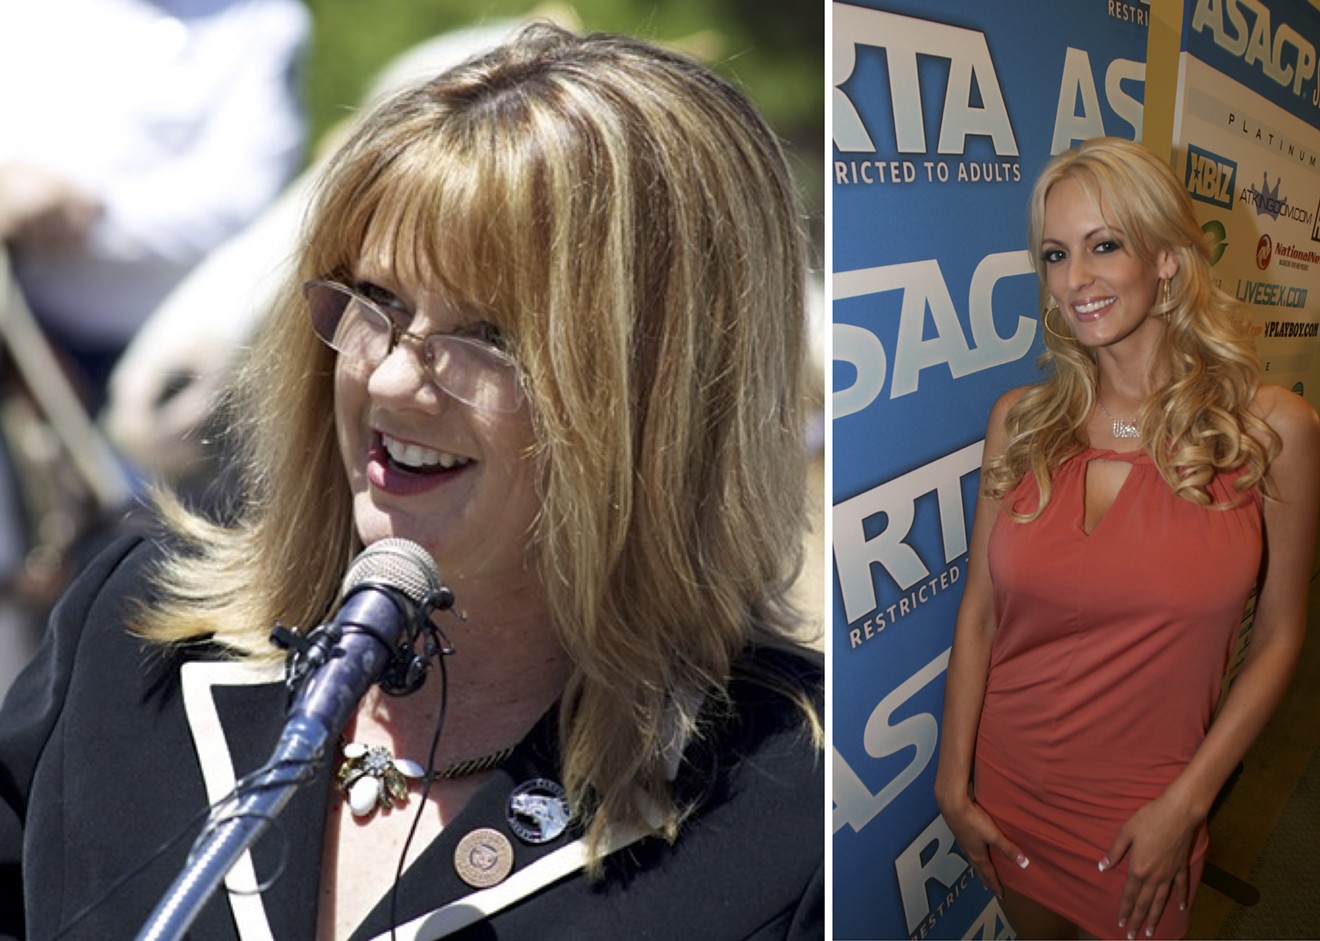 A Phoenix activist is recruiting adult film actress Stormy Daniels to run against the governor of Arizona as well as conservative state lawmaker Kelly Townsend.